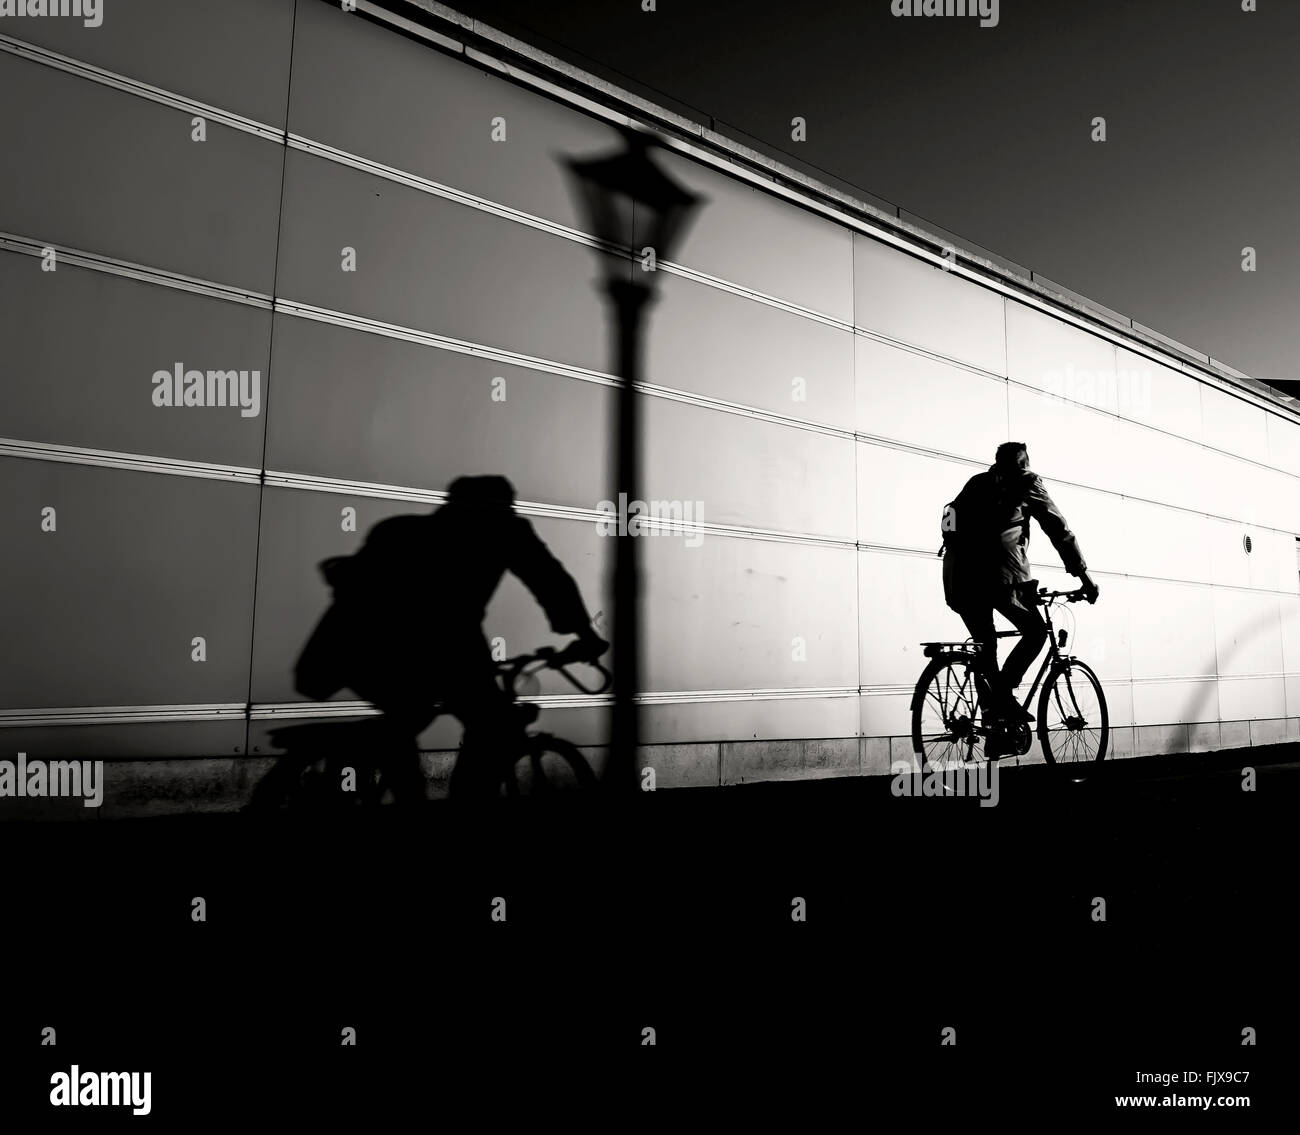 Man Riding Bicycle On Road By Wall Stock Photo